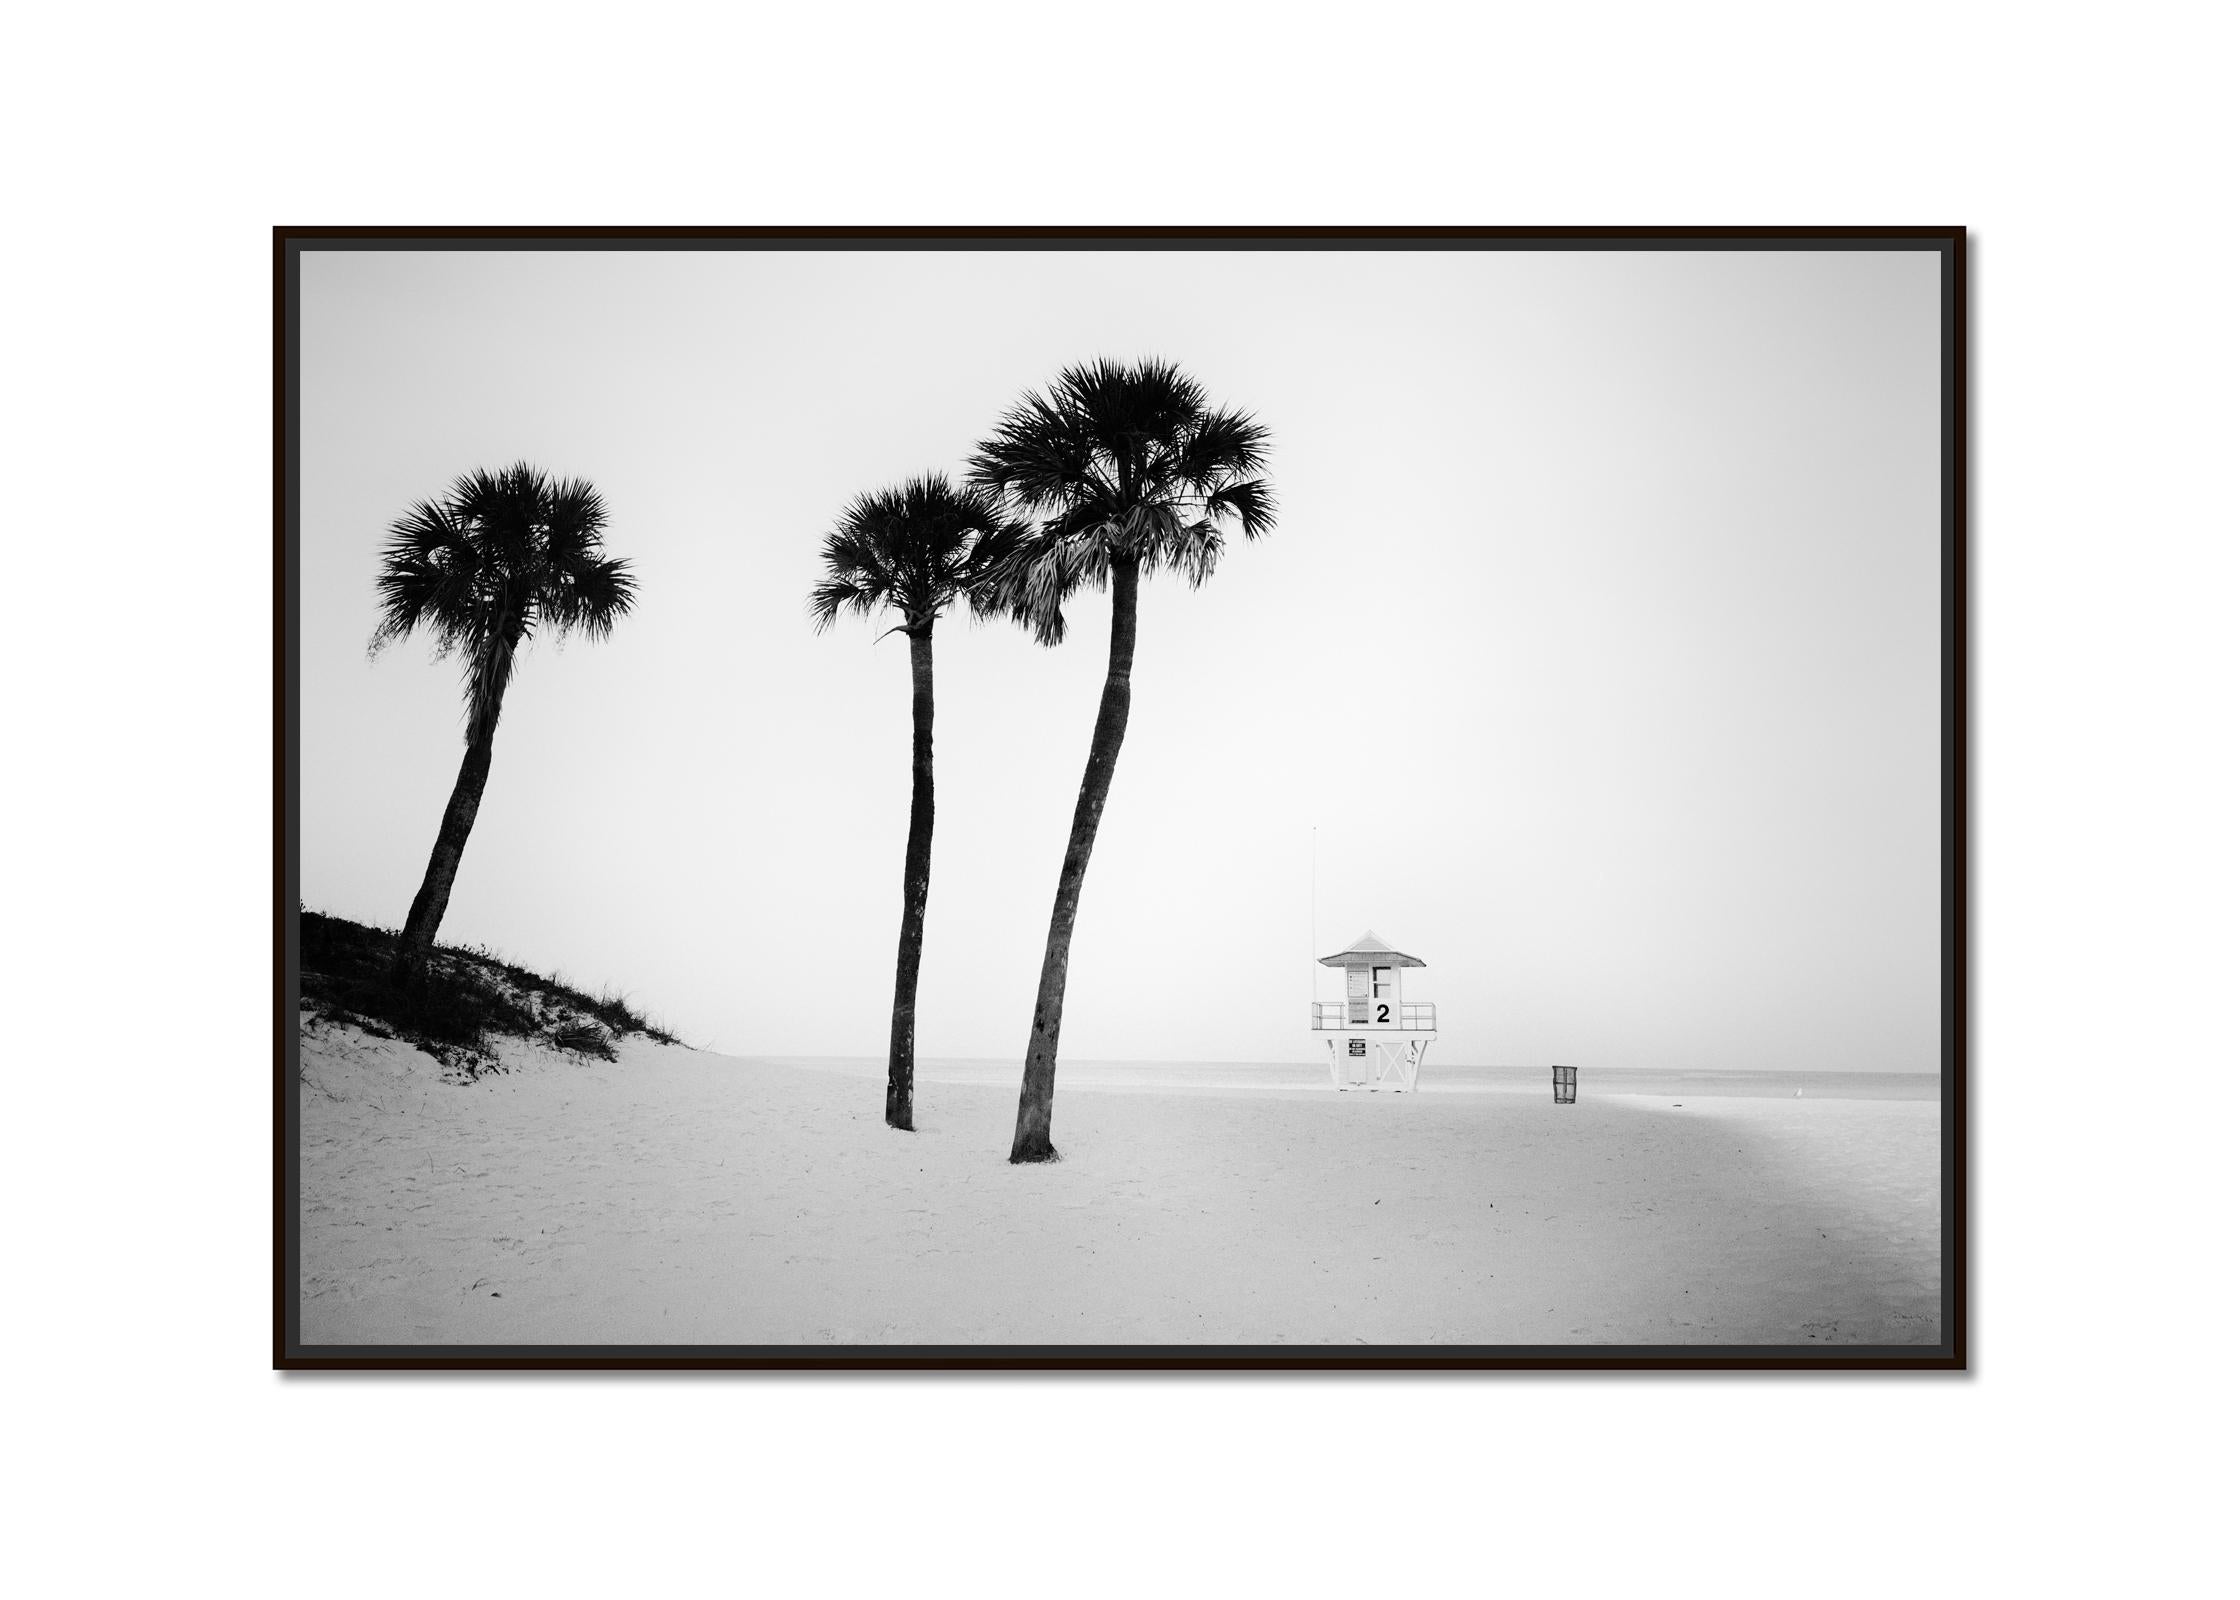 Lifeguard Tower, Miami Beach, Florida, USA, black & white landscape photography - Photograph by Gerald Berghammer